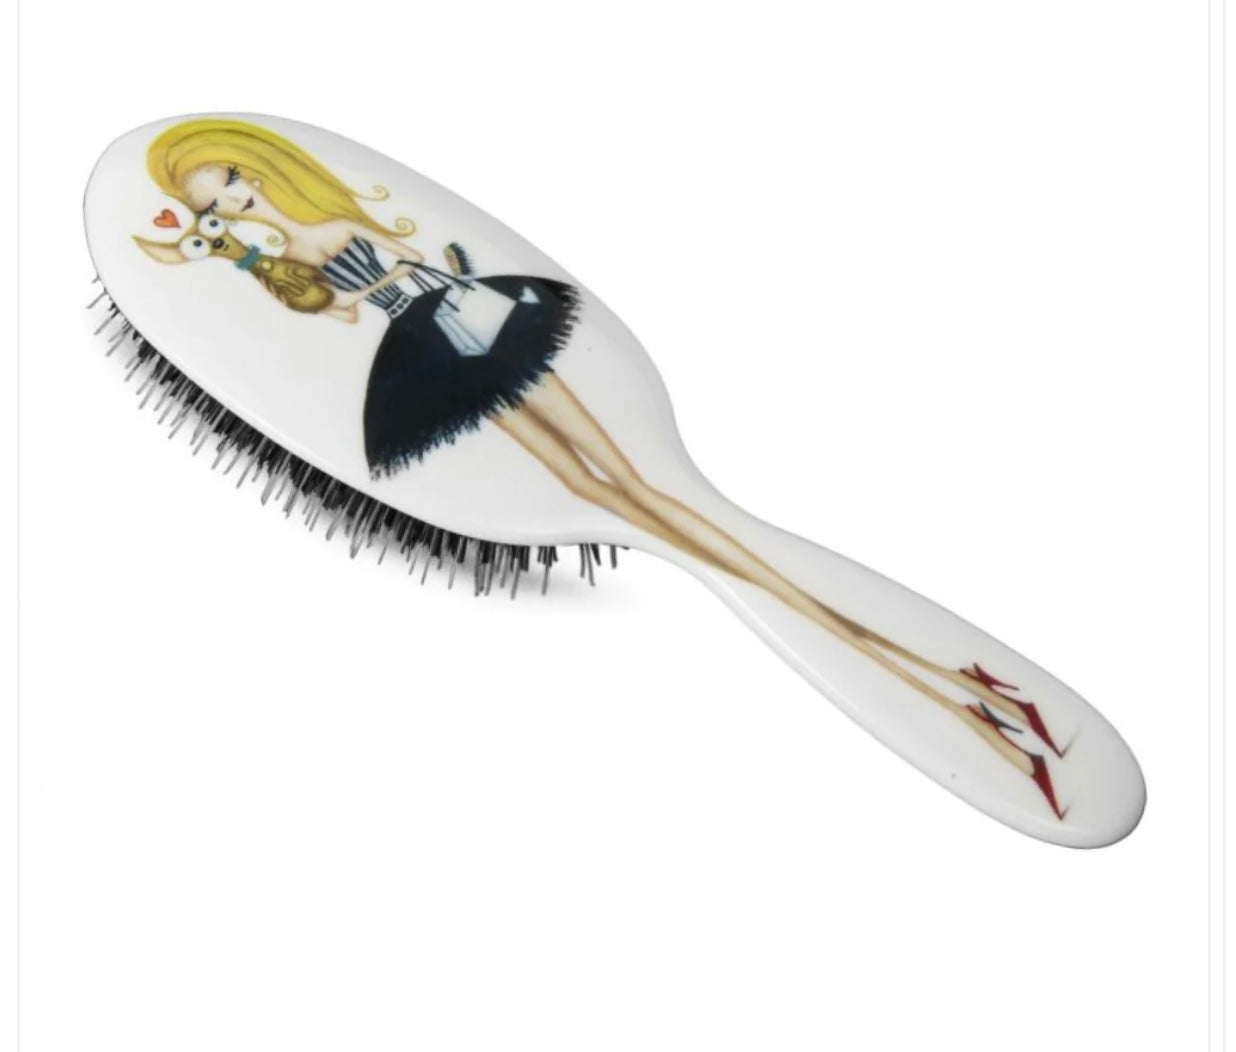 Hairbrush and Comb Set: "Miss Daisy Evening"